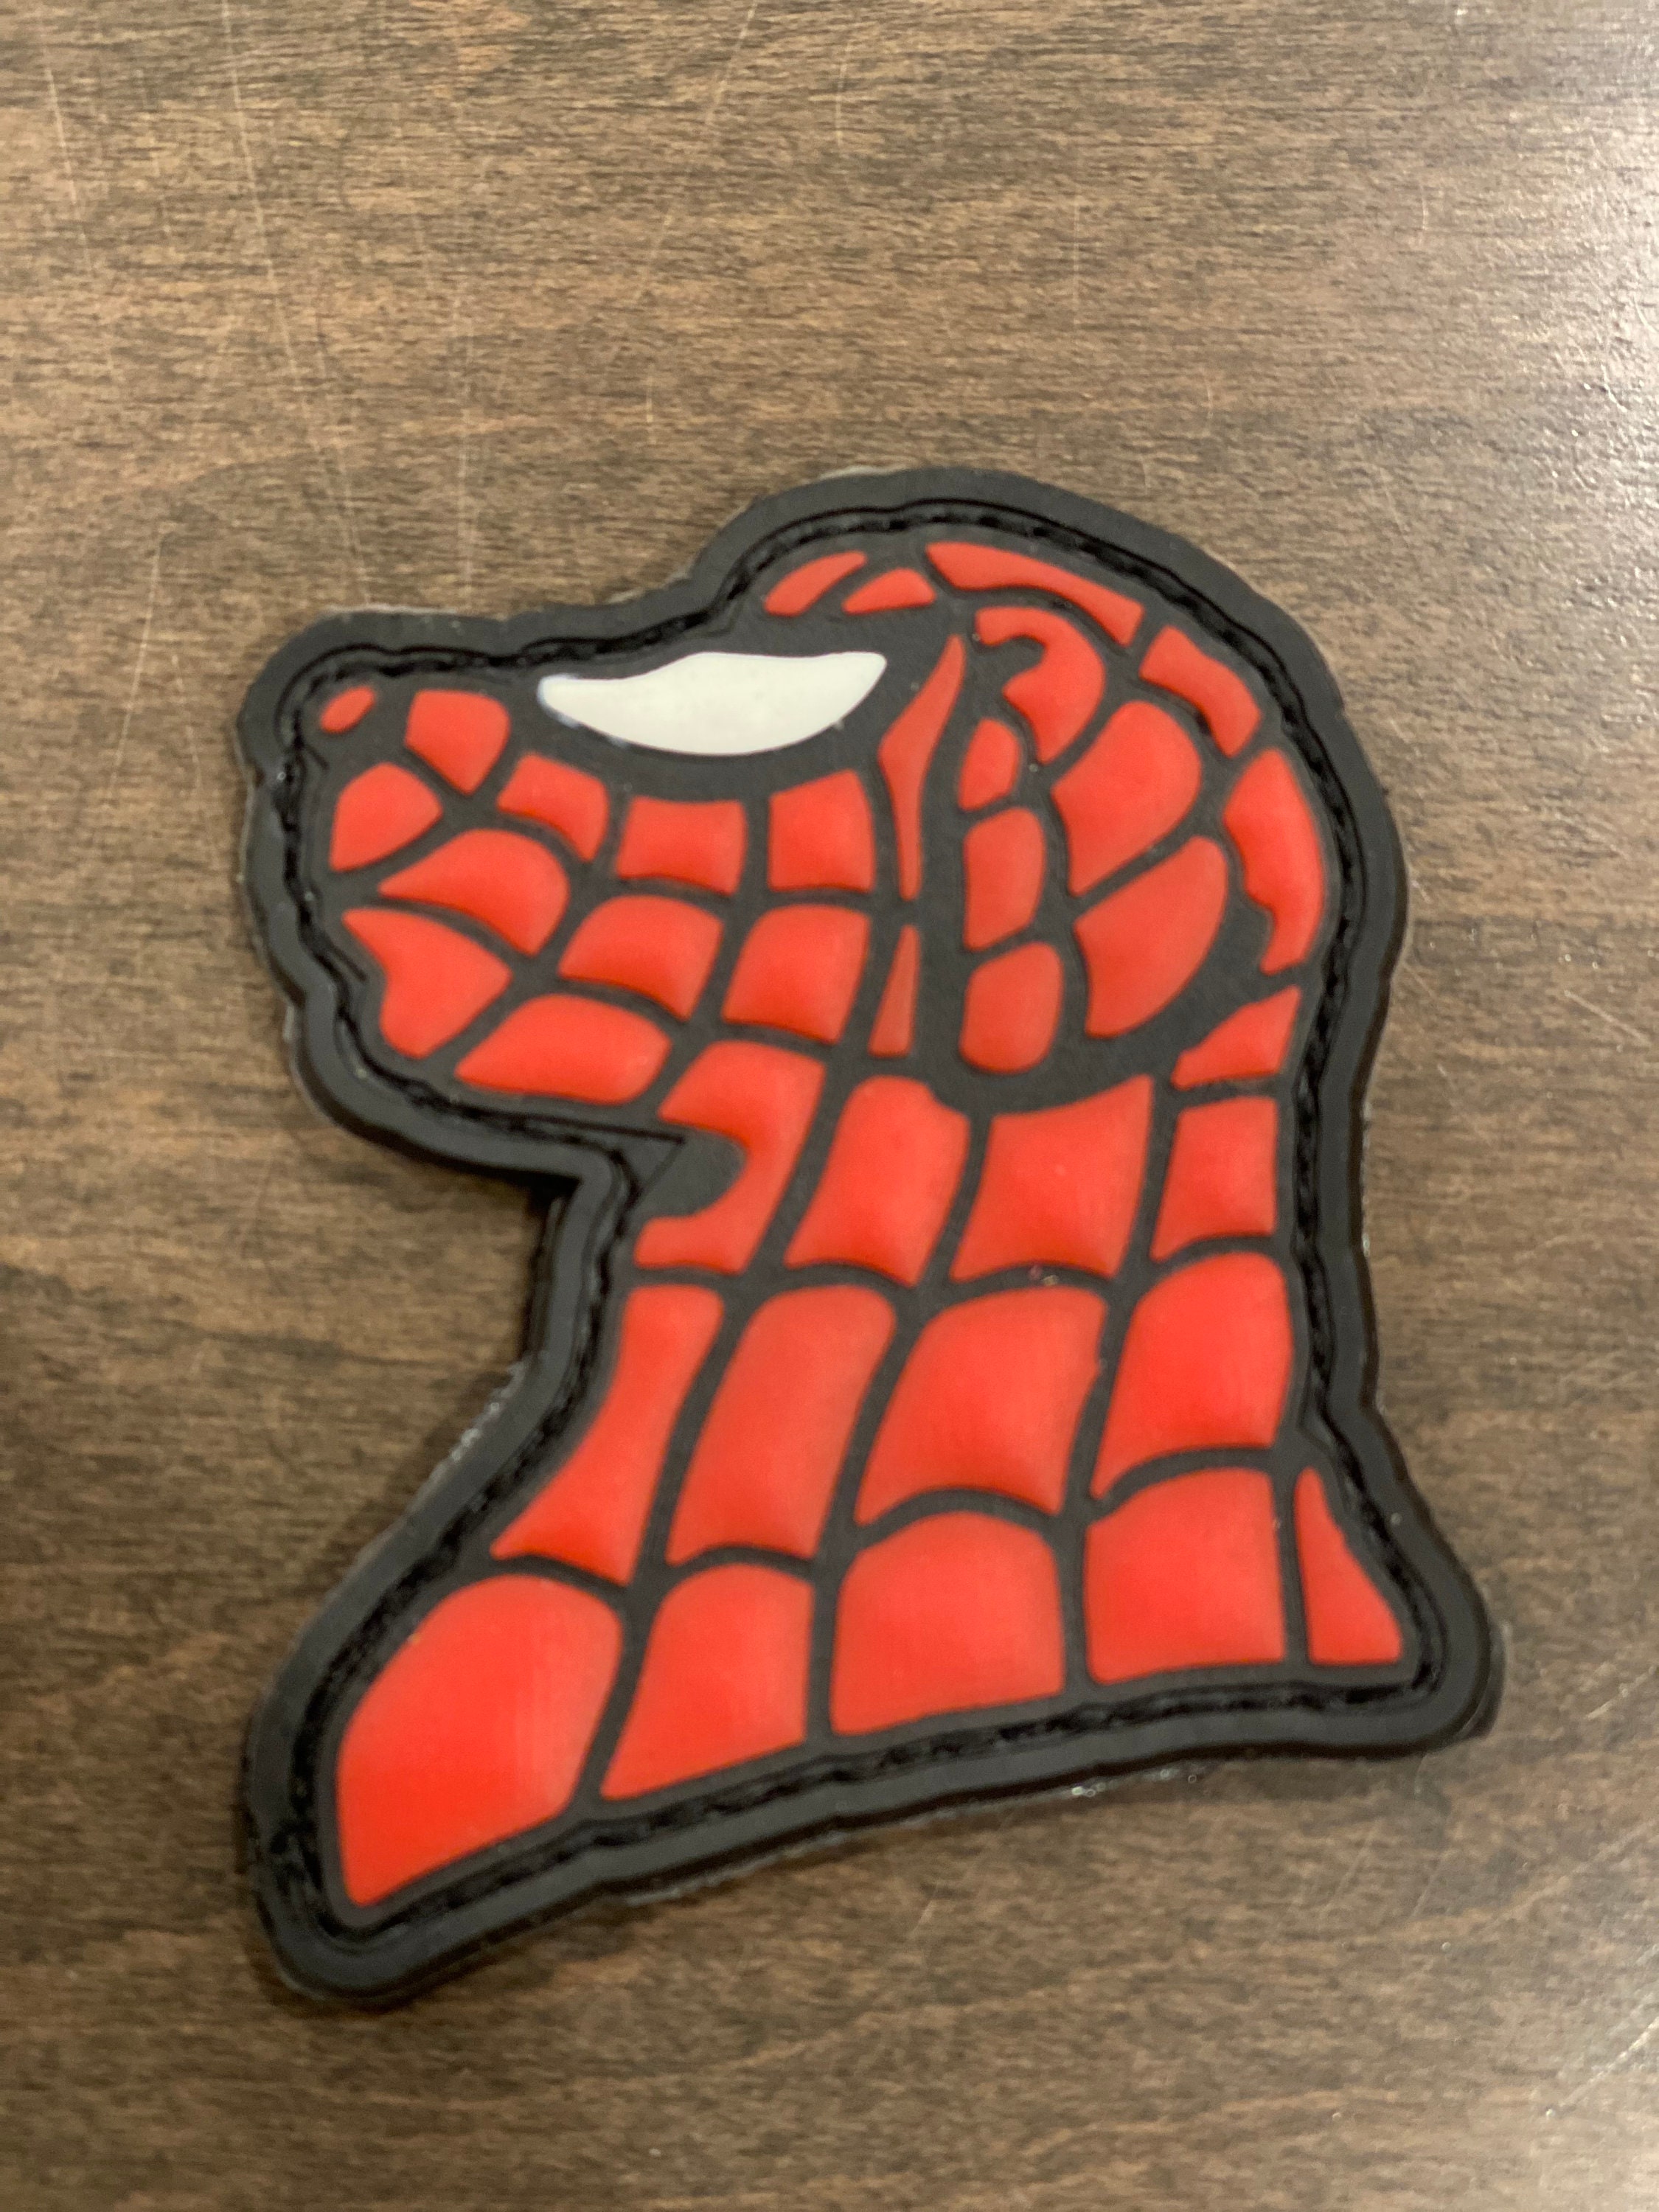 Spiderman – Patch Collection